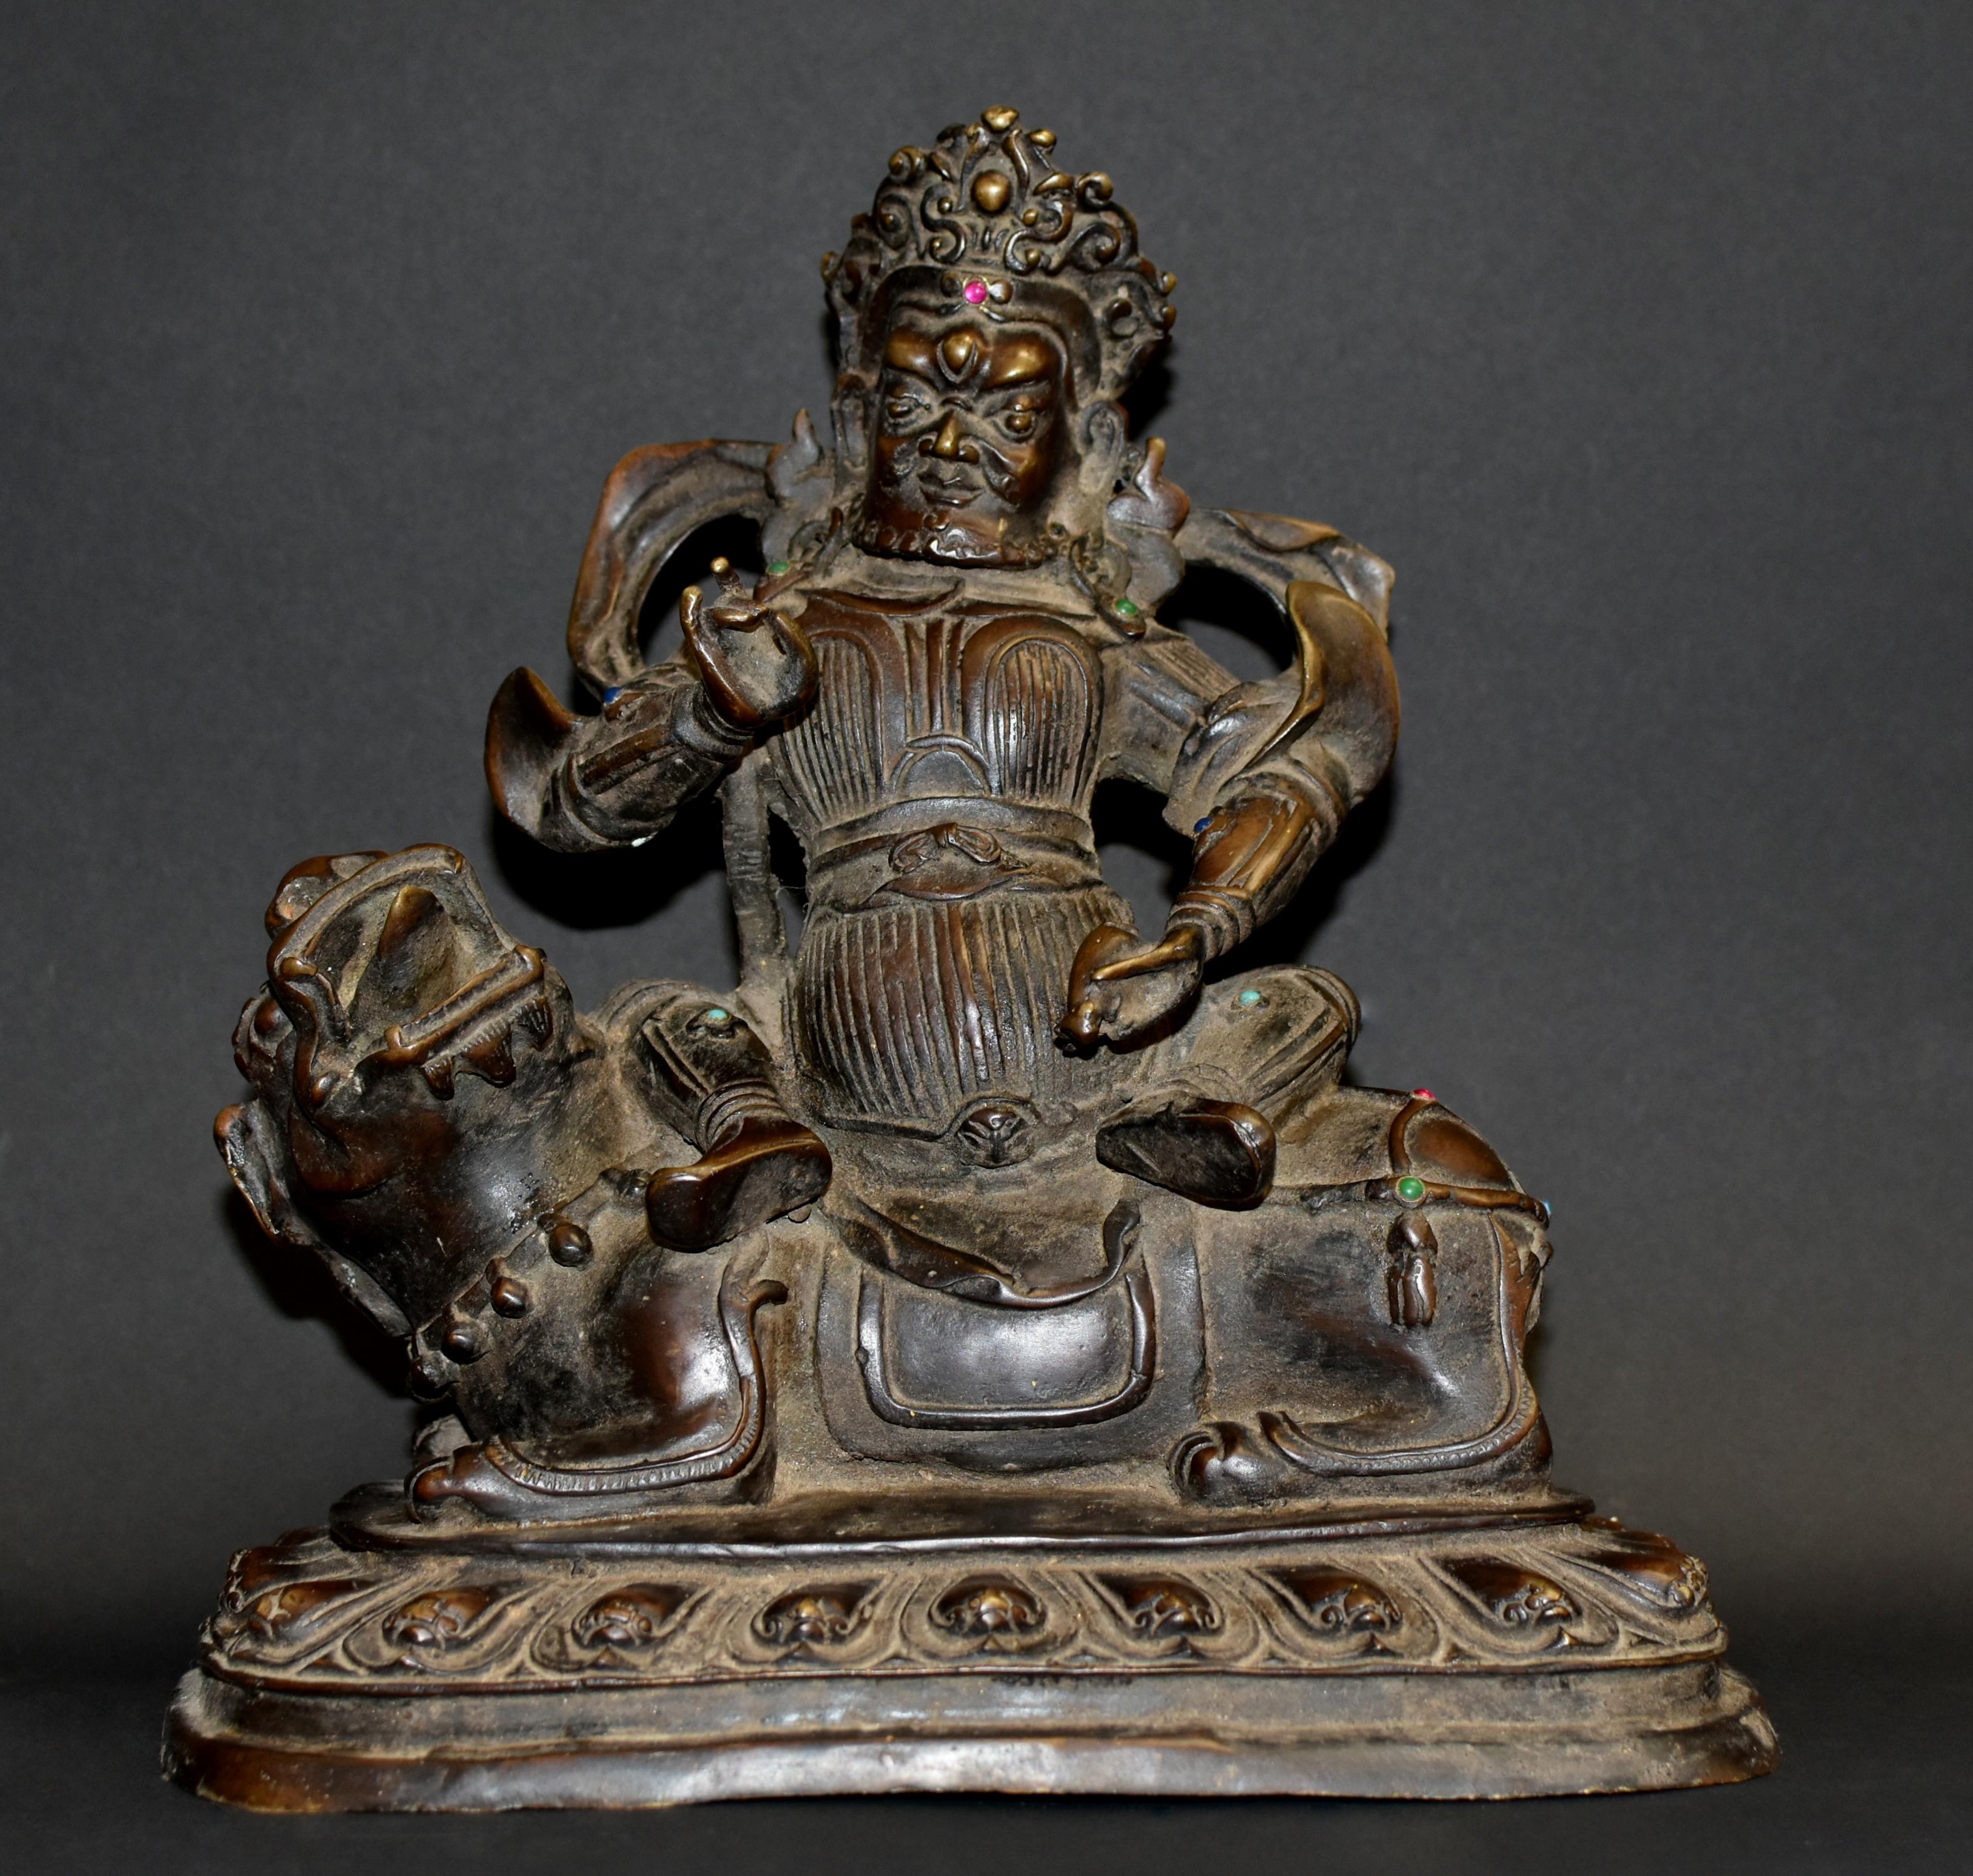 A very rare, 11 lb, fine bronze statue of the Tibetan God of Wealth Kubera. The square face with large protruding eyes has a smiling and benevolent countenance, hair covered in an elaborate crown, dressed in an armor and sits on top of a holy beast,